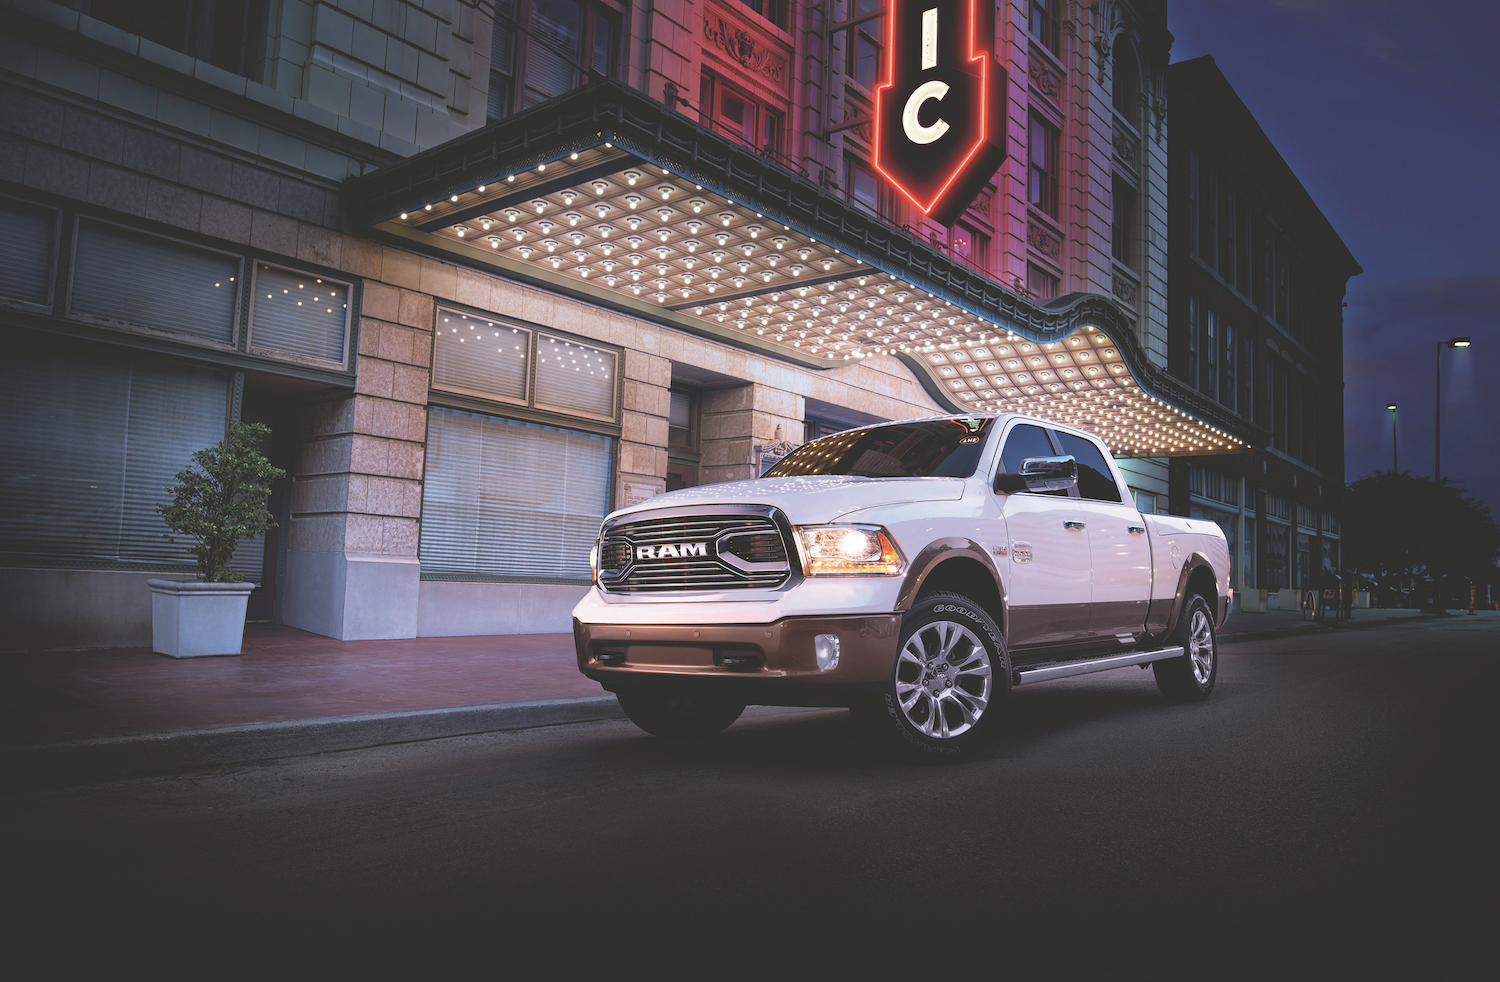 A white Ram truck parked in front of a building in the city with neon lights.